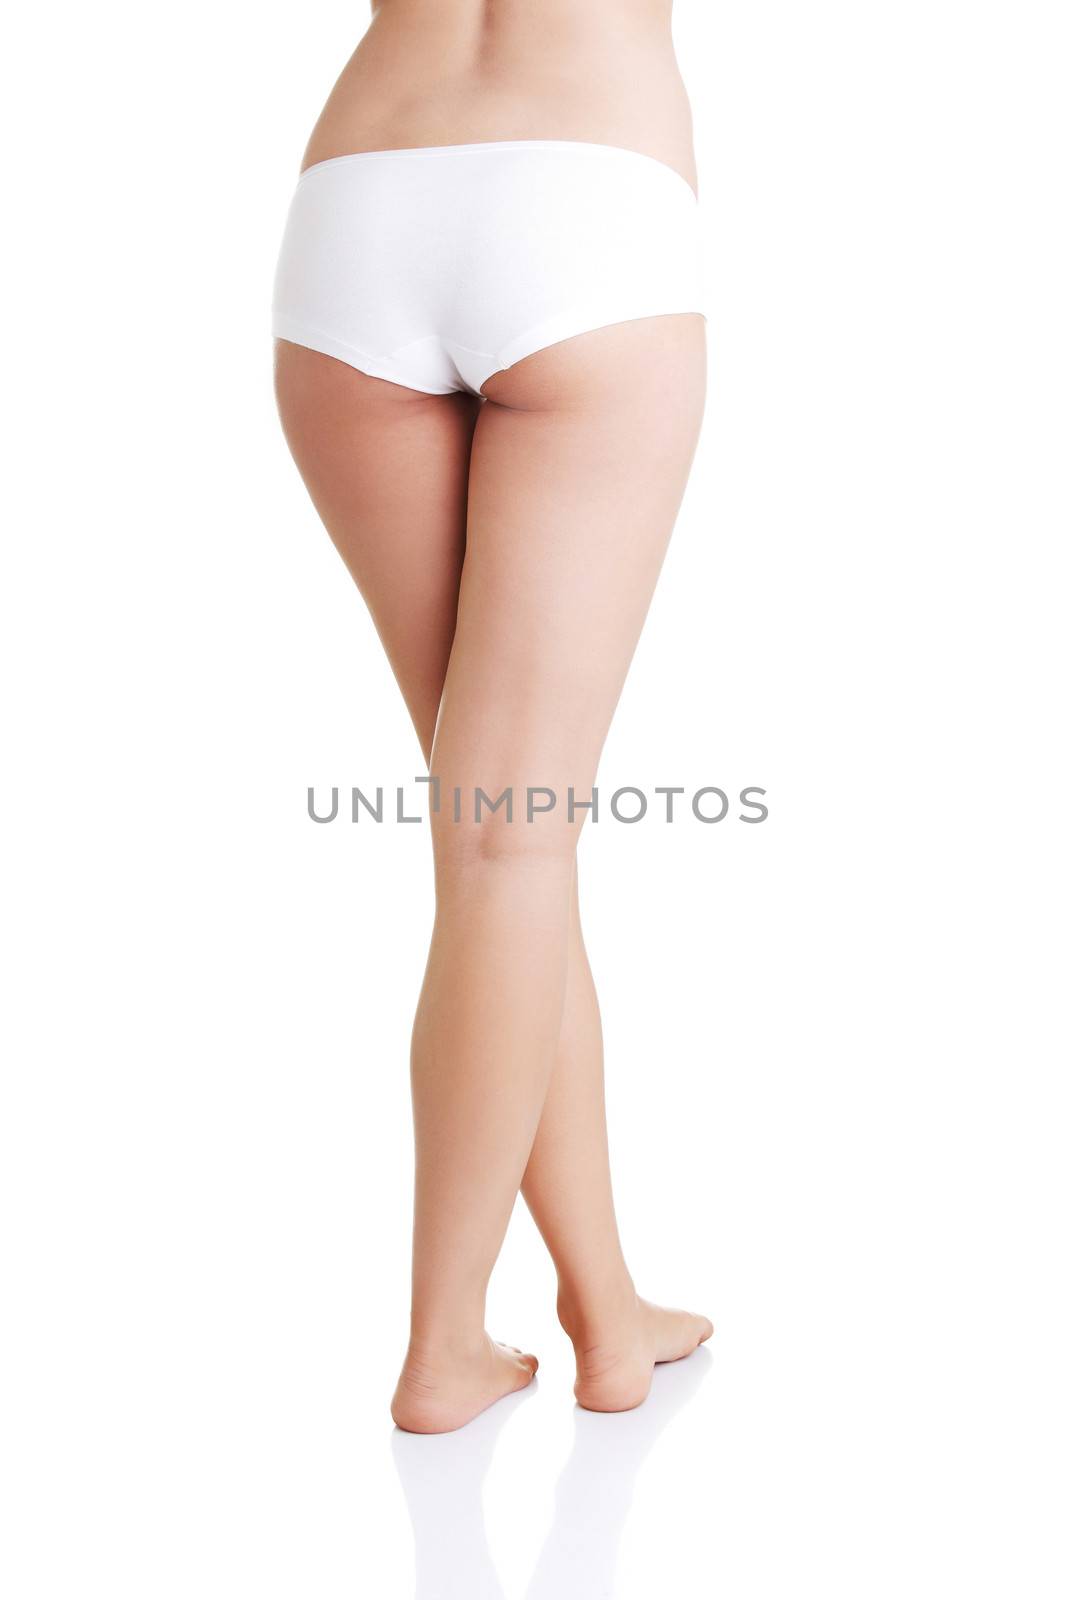 Slim tanned woman's body in black panties. Isolated over white background.